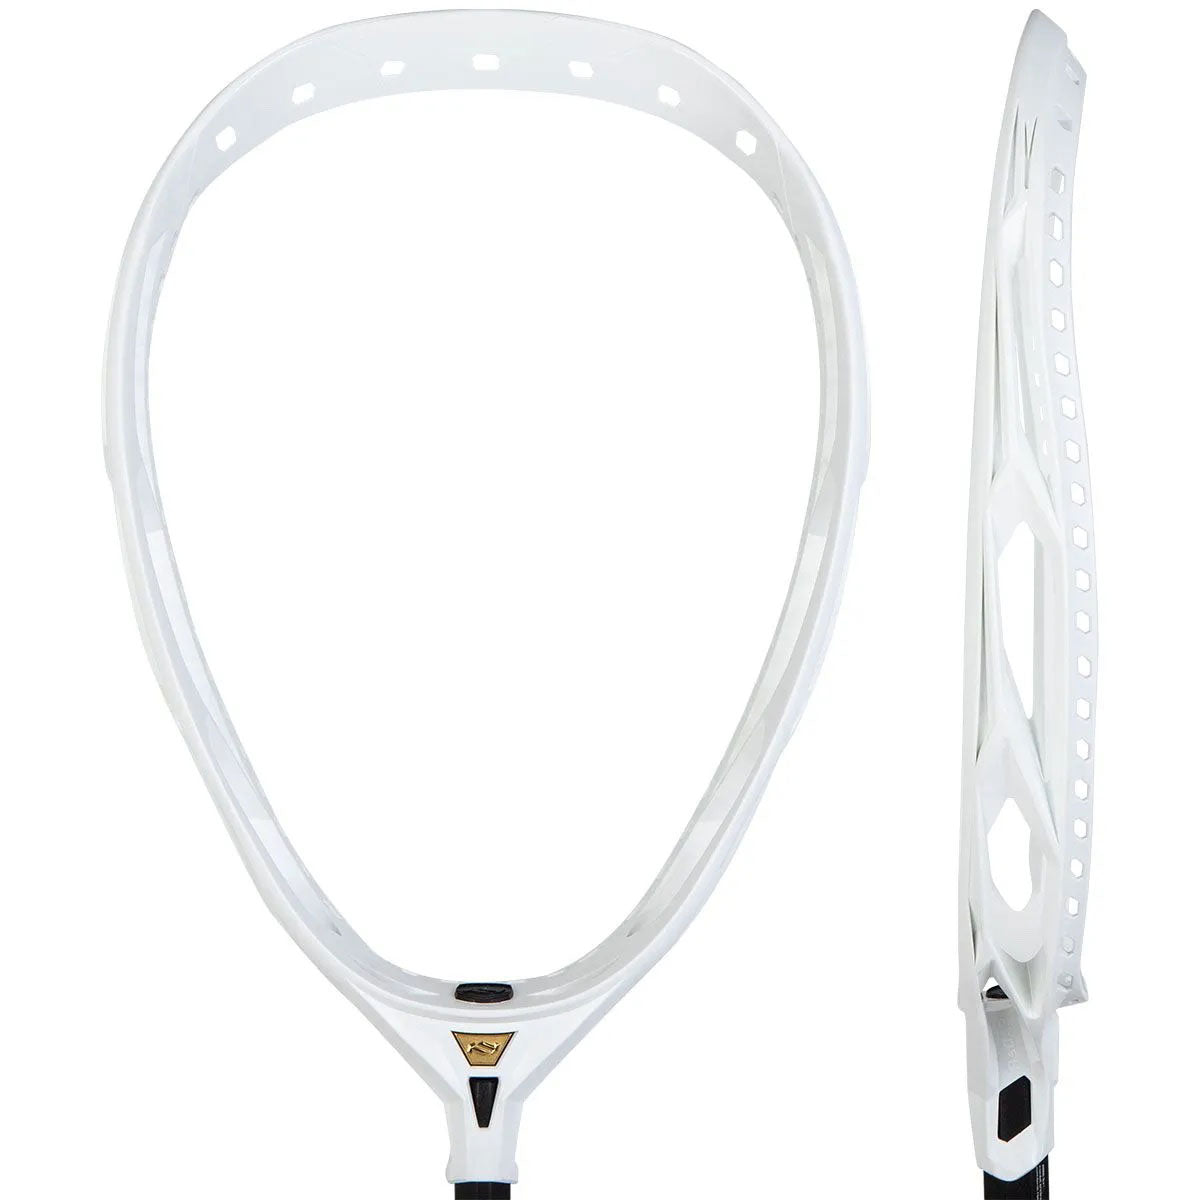 Front and side picture of the True RADAR Unstrung Goalie Lacrosse Head